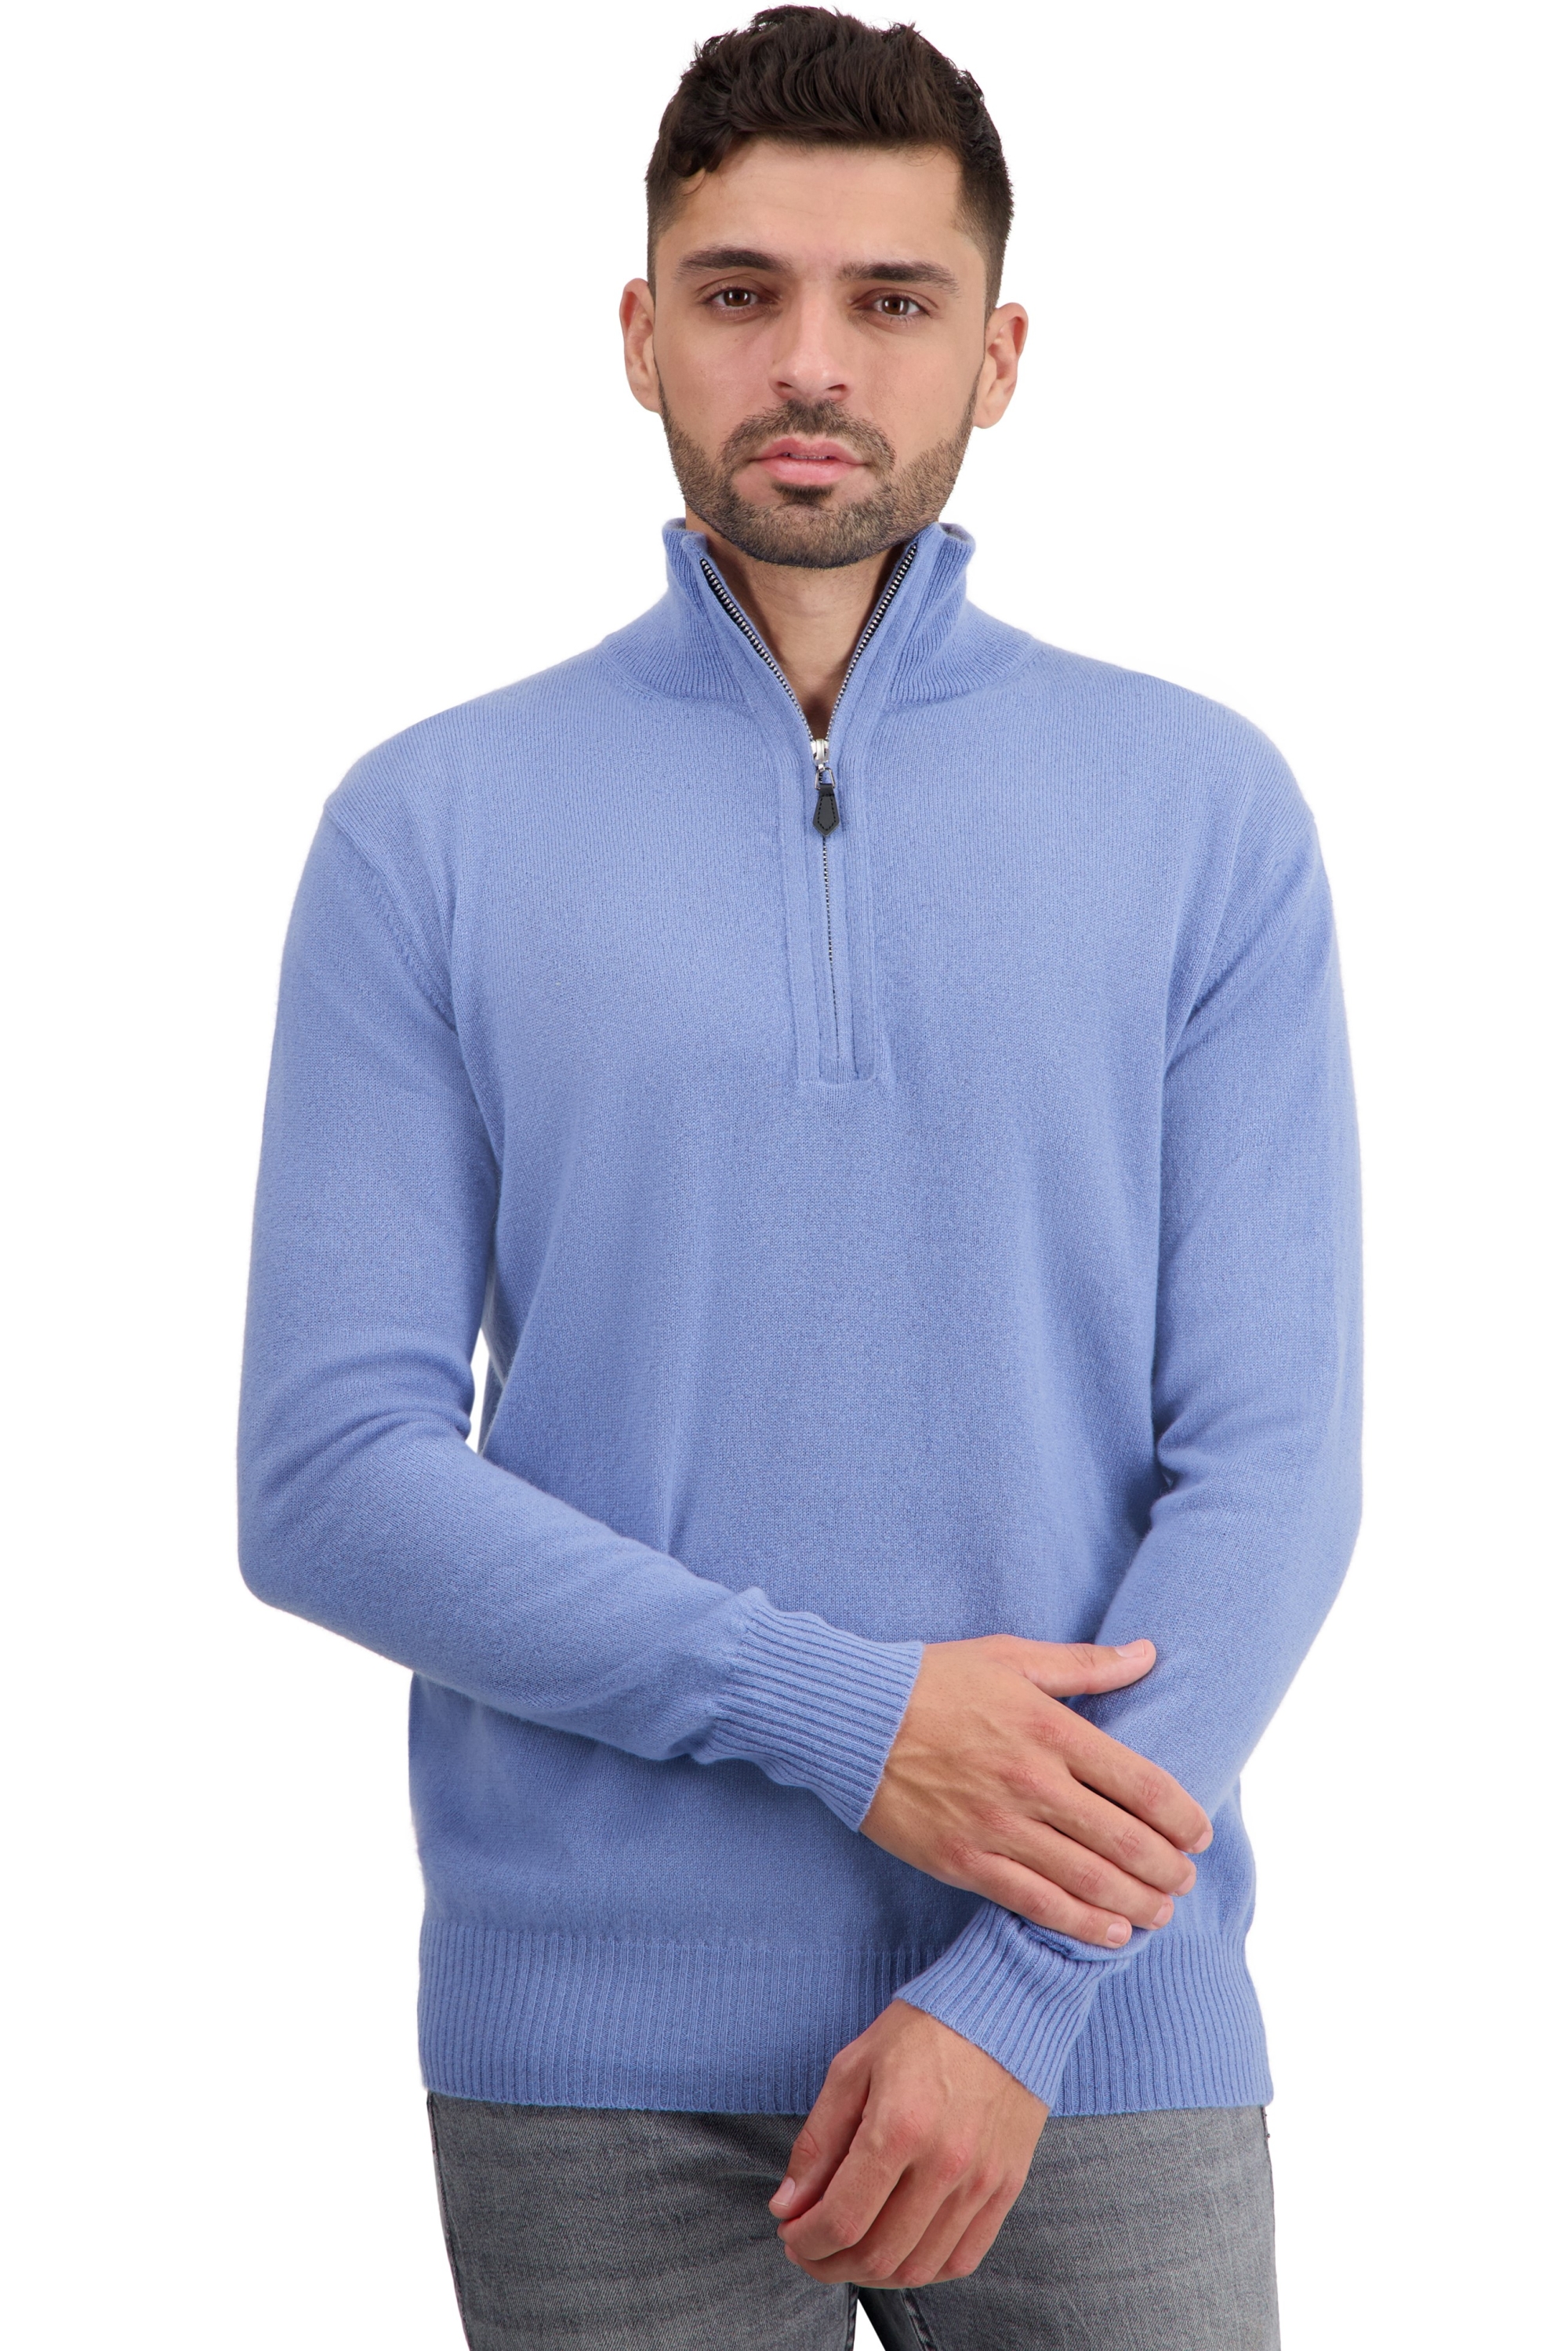 Cashmere men polo style sweaters toulon first light blue 2xl